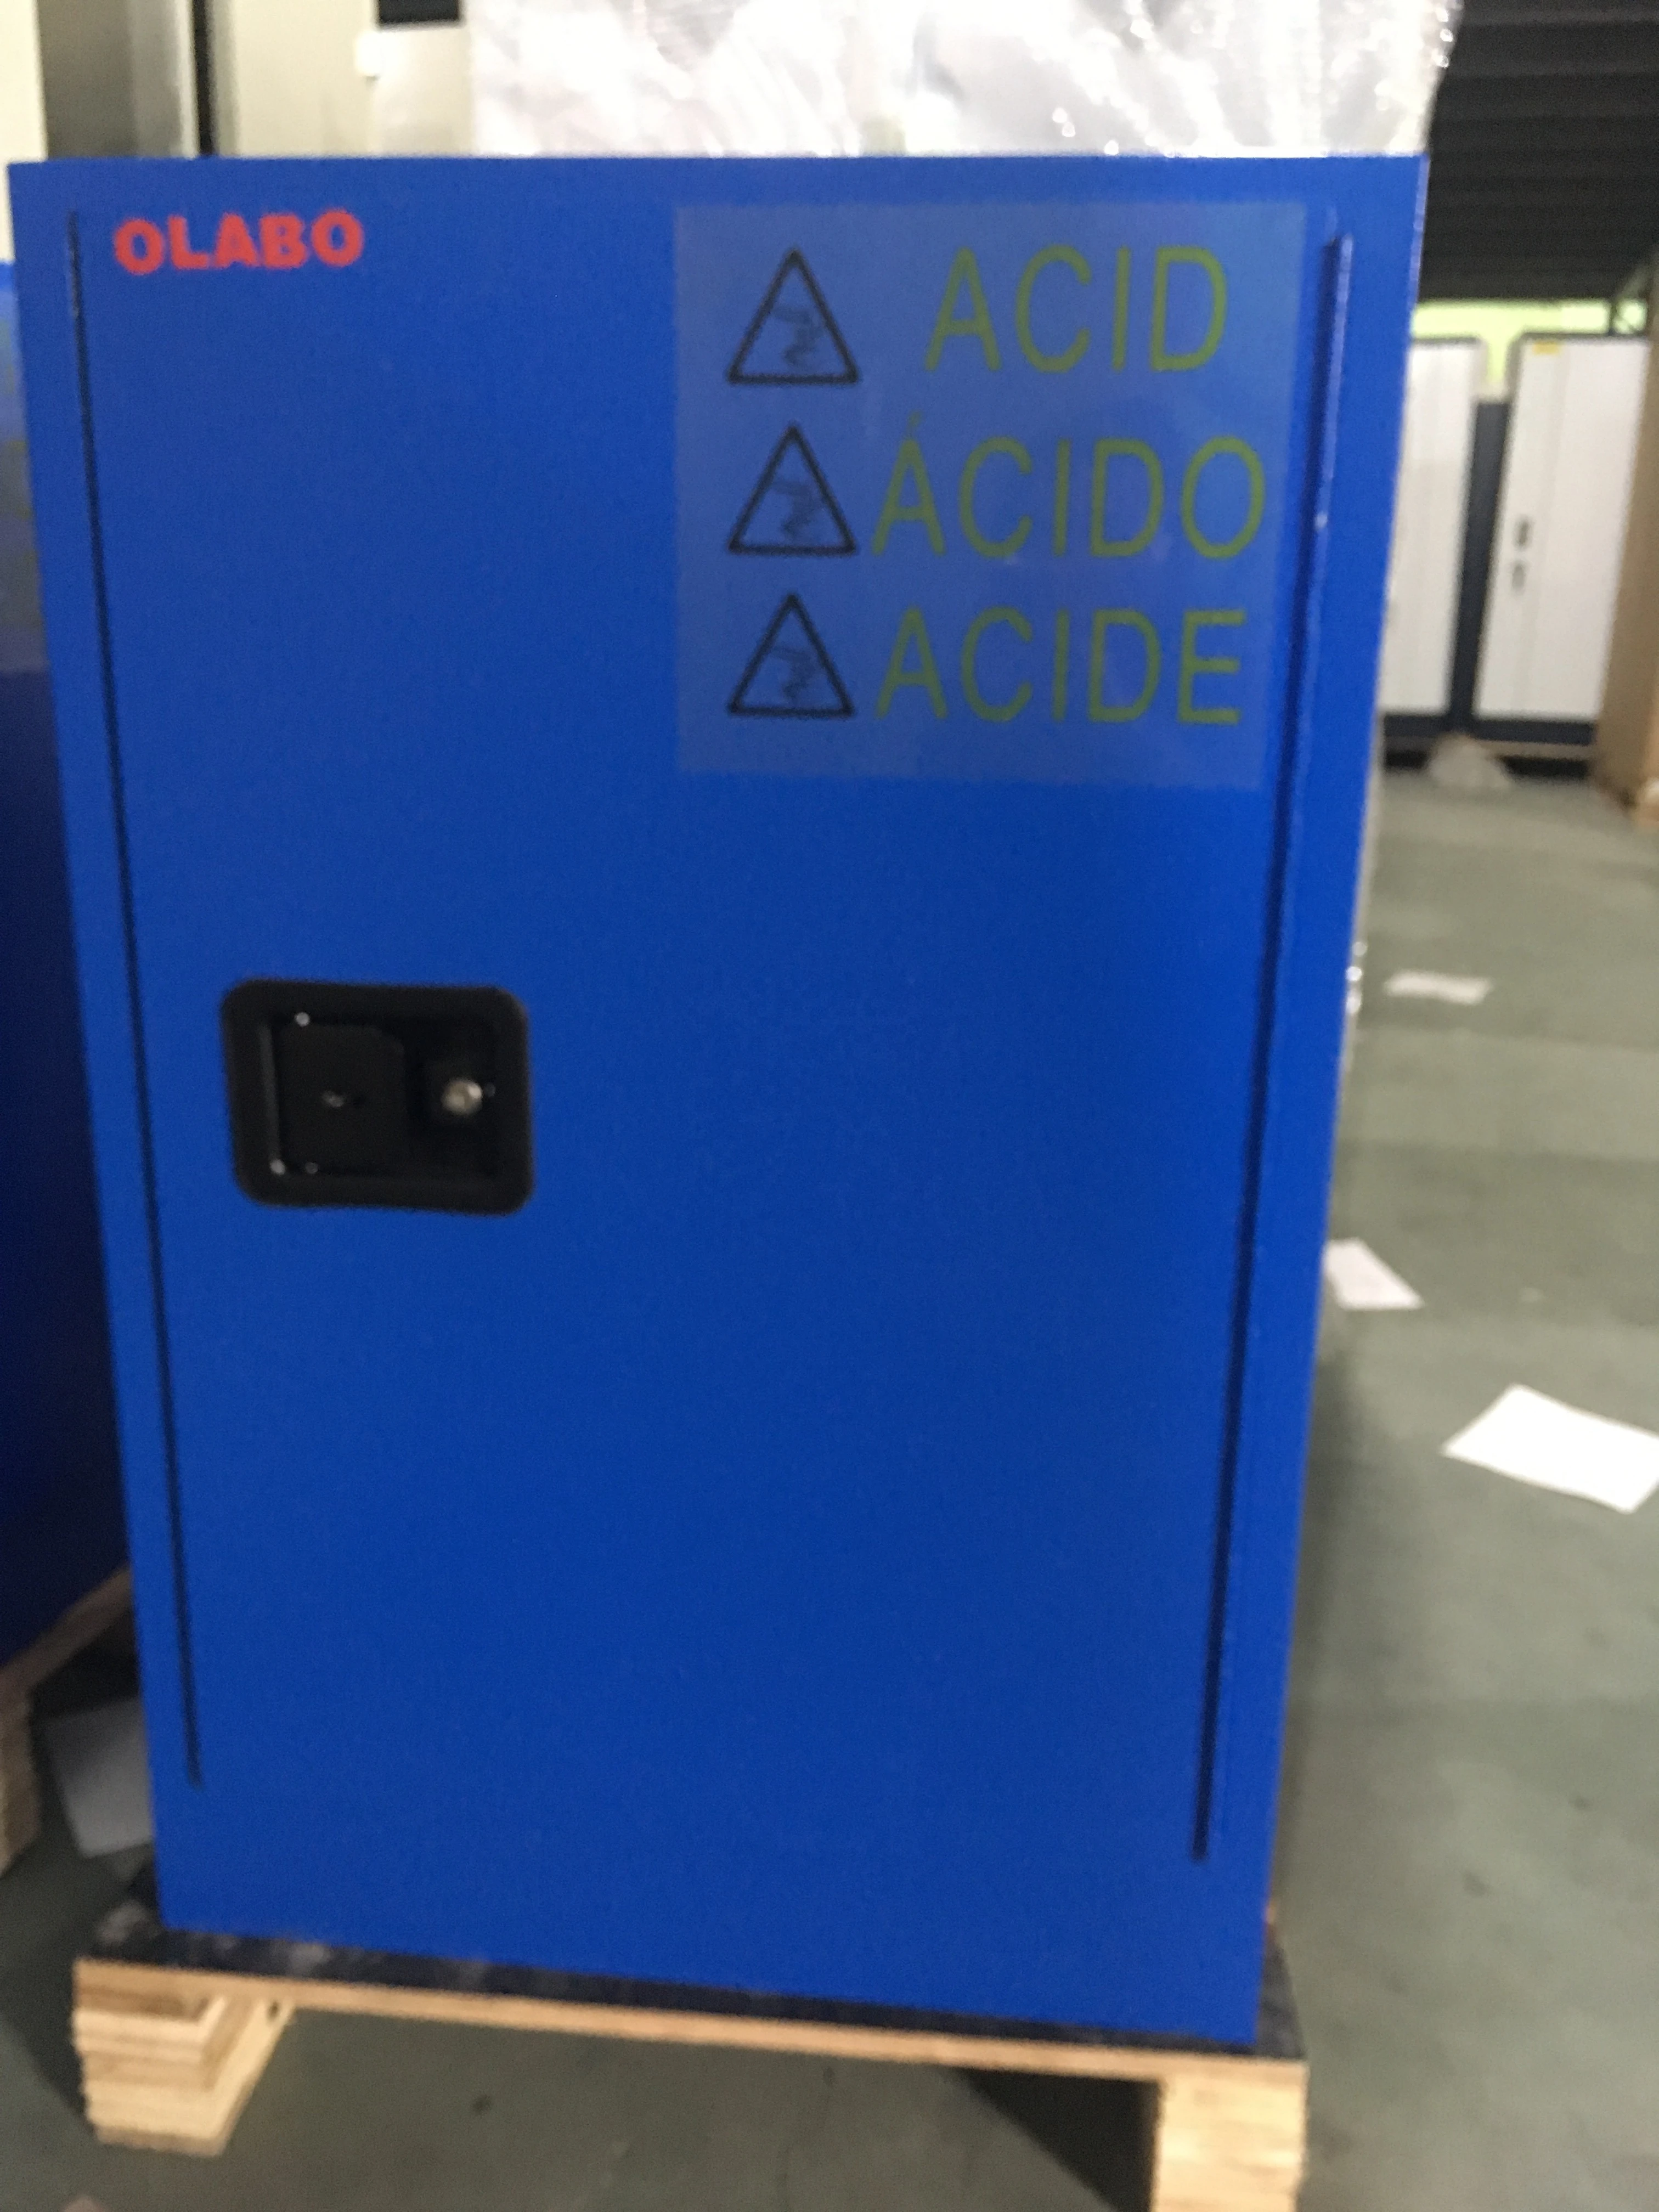 Corrosive Safety Cabinet Storage for chemical , used in laboratory equipment for safety 4gallon 12gallon